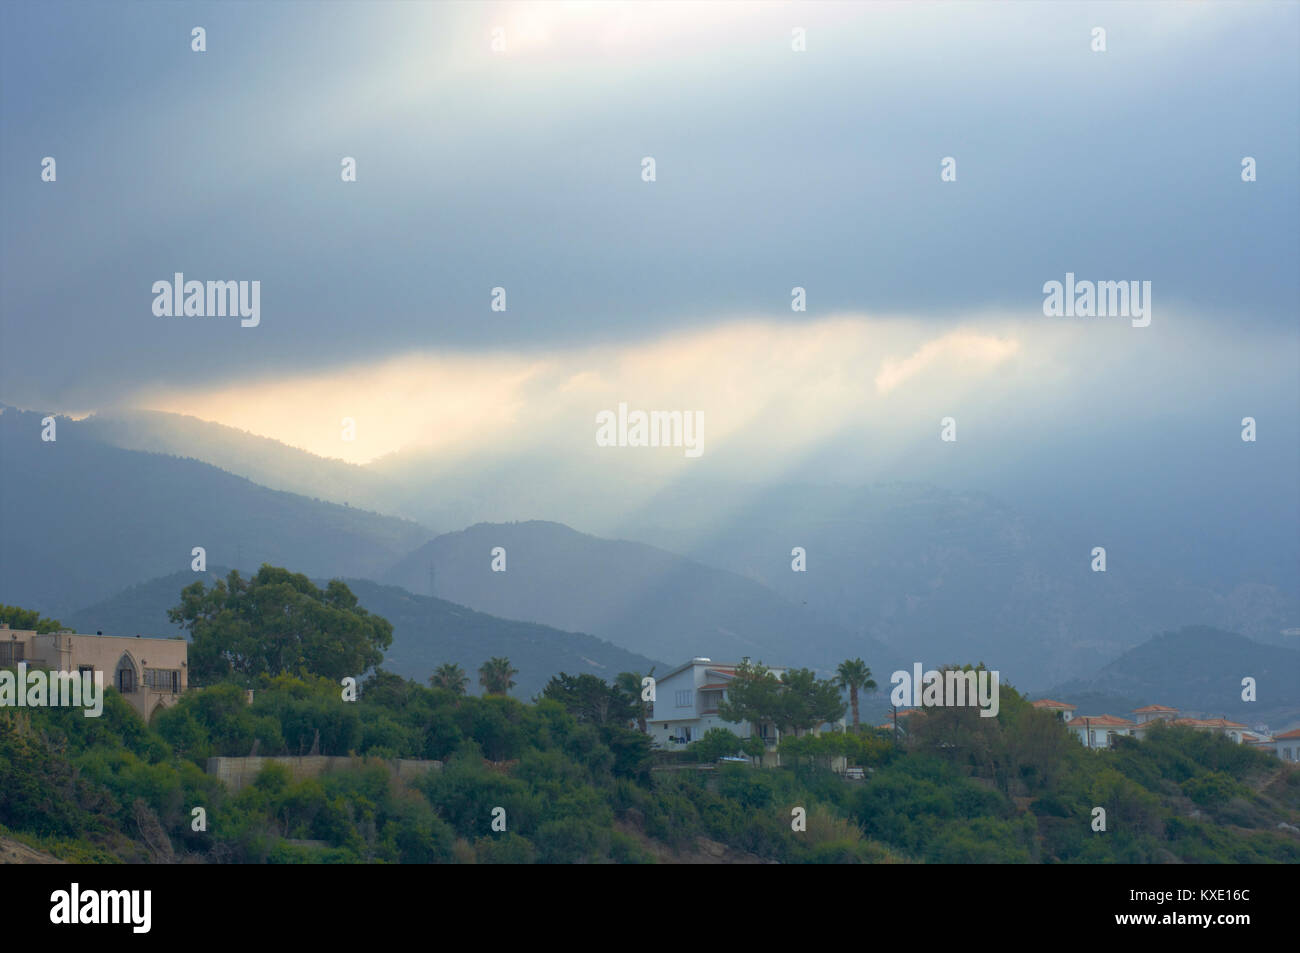 Dramatic scenery with sun beams coming through the clouds in Kyrenia, Cyprus Stock Photo